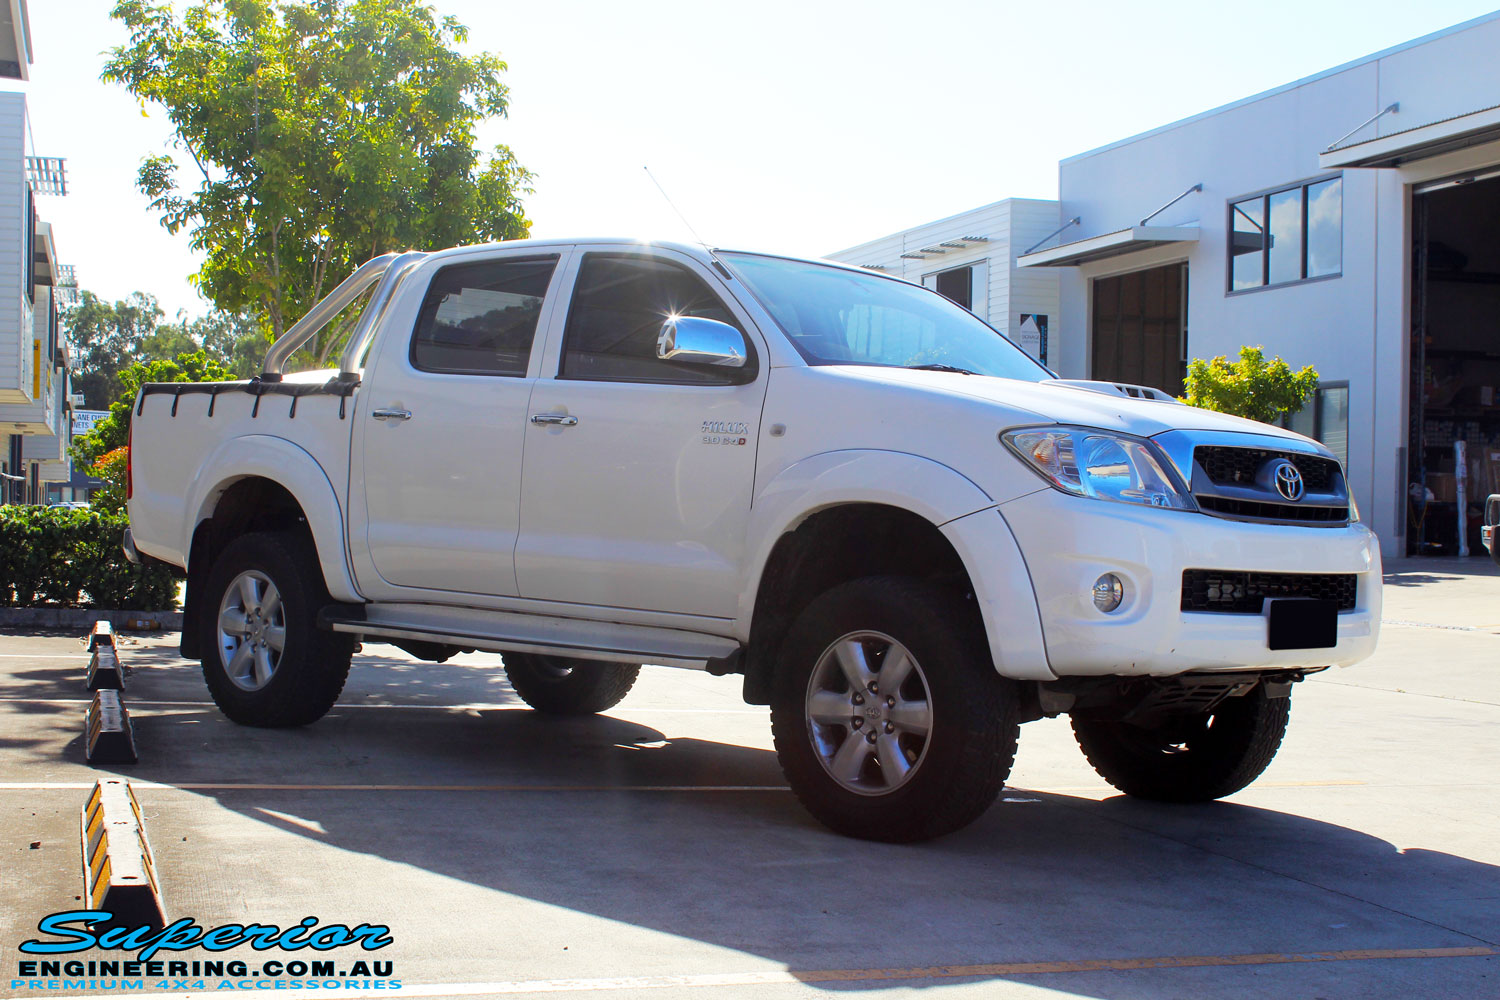 Right front side view of a Toyota Vigo Hilux Dual Cab in White after fitment of a Superior Nitro Gas 2" Inch Lift Kit